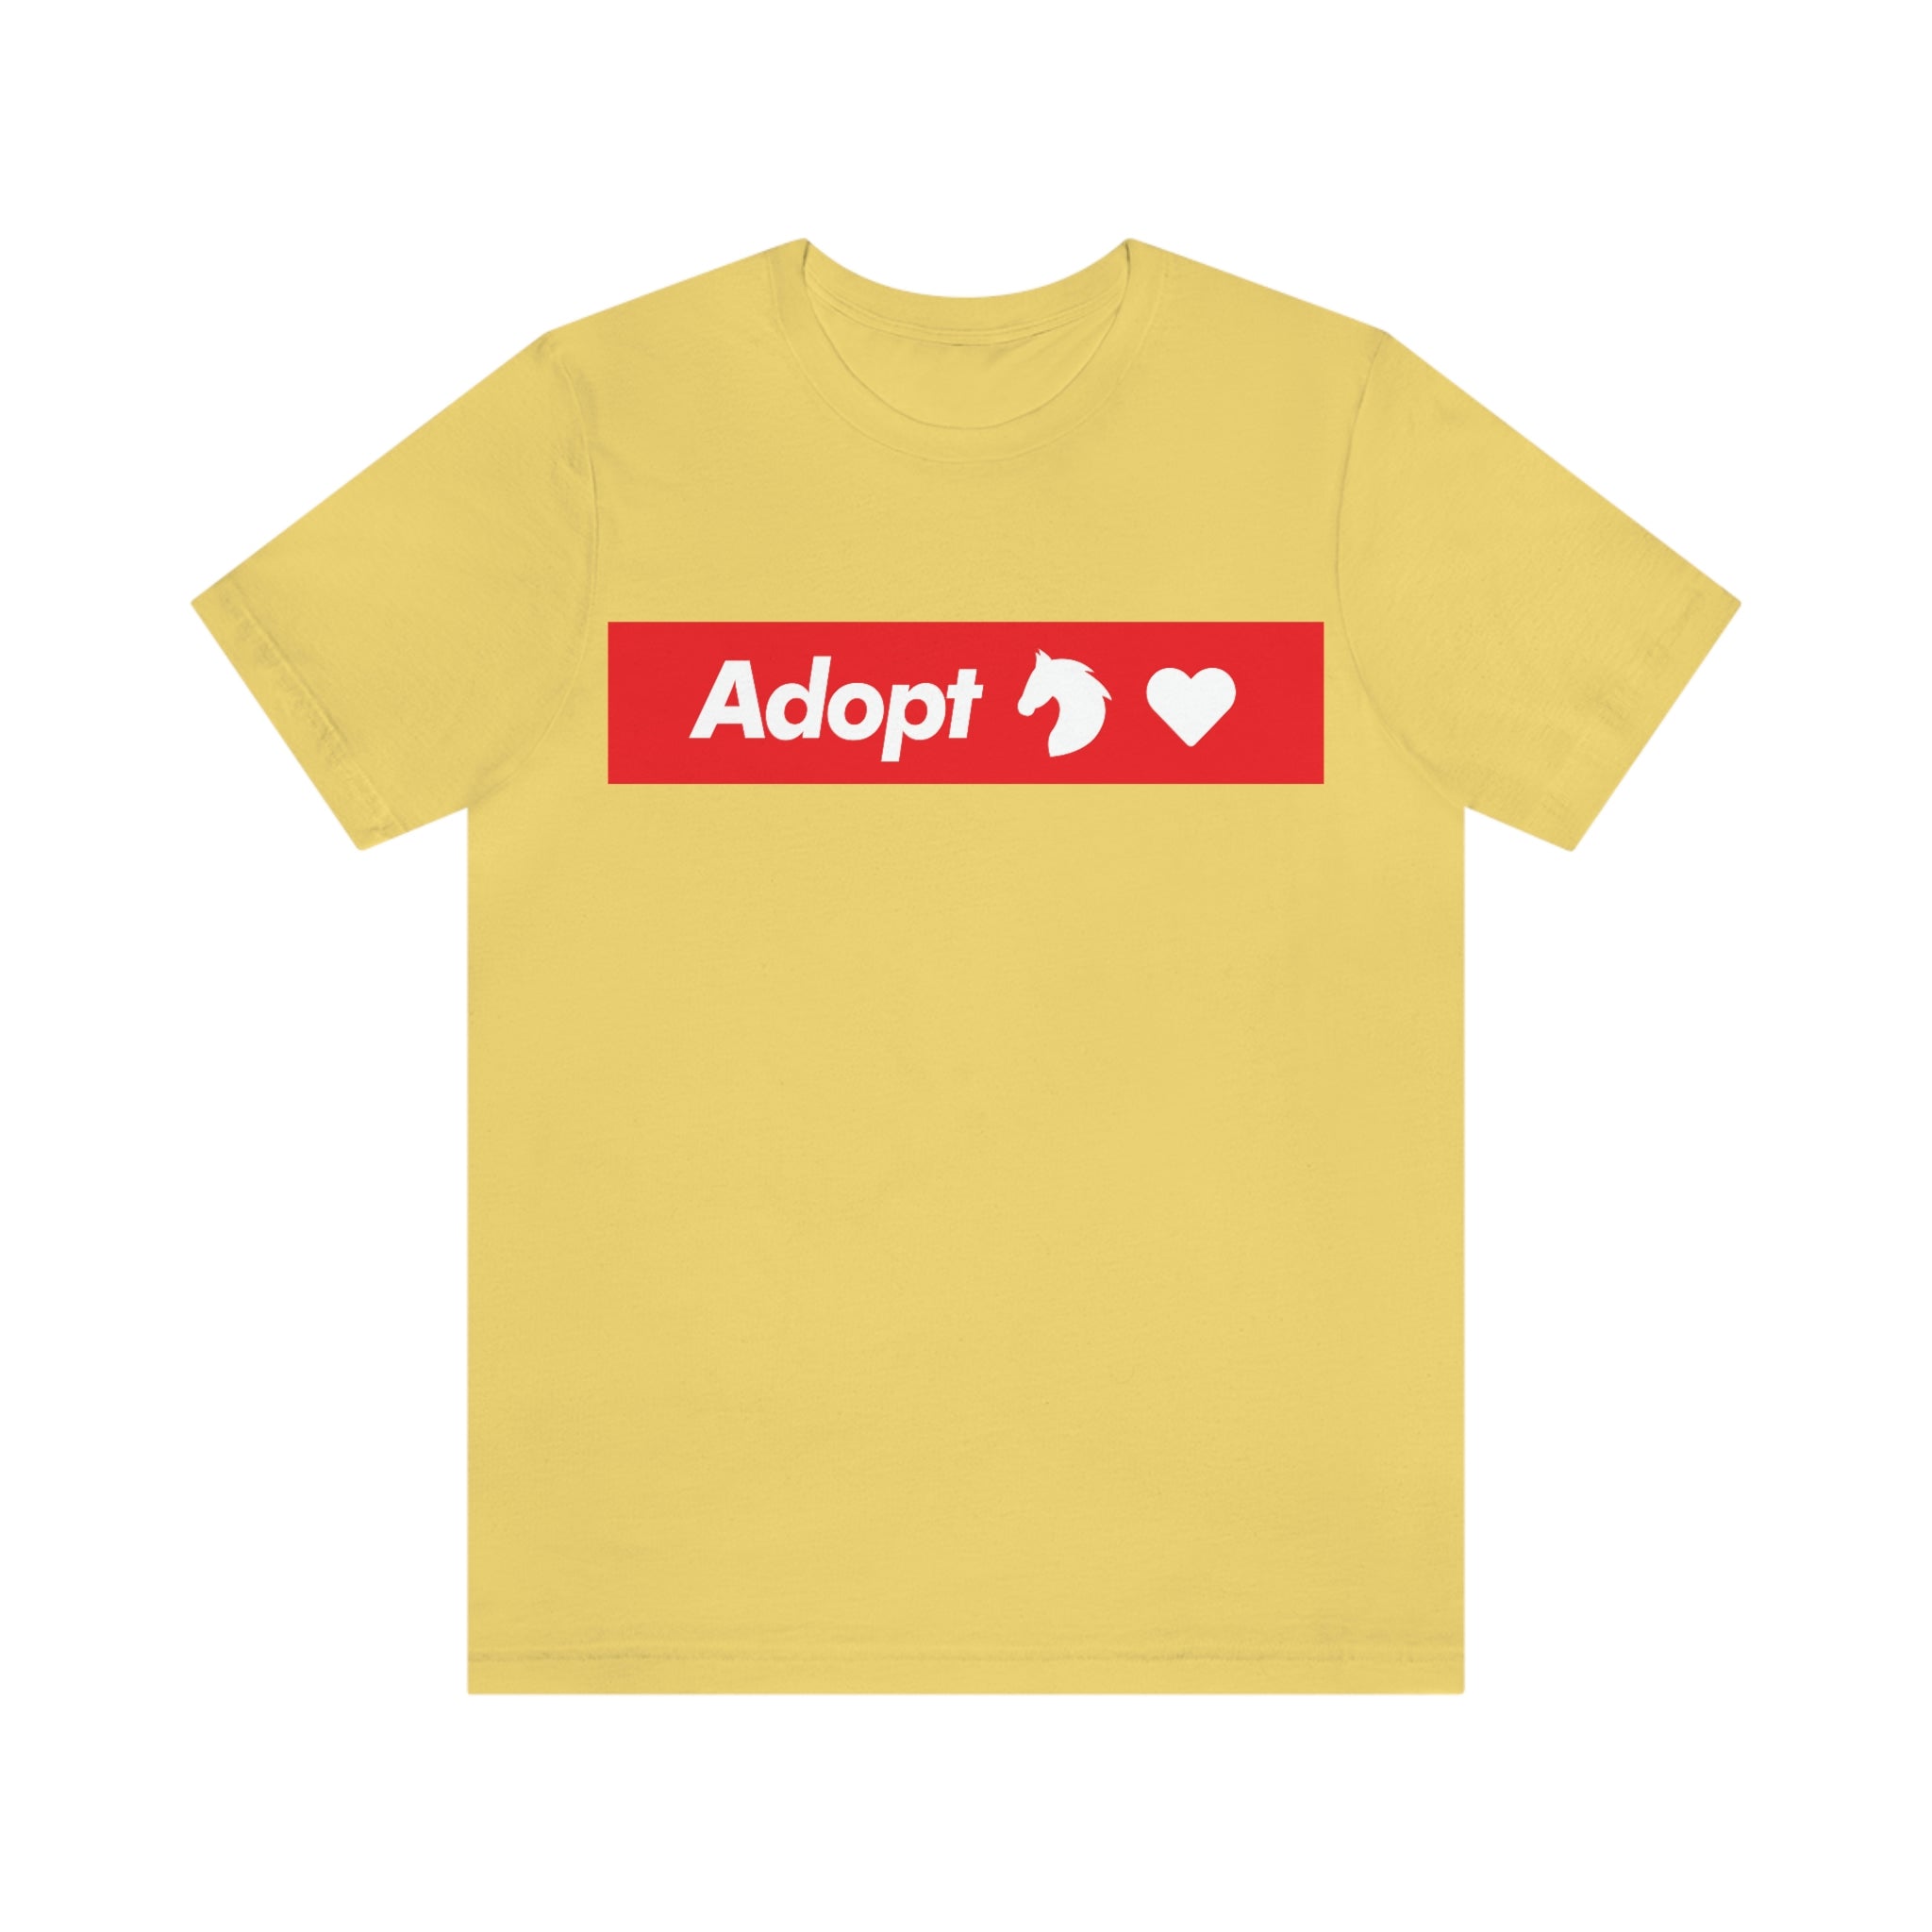 Adopt Love Rescue Horse - RED BANNER : Unisex 100% Comfy Cotton T-Shirt, Supporting Humane Animal Shelters